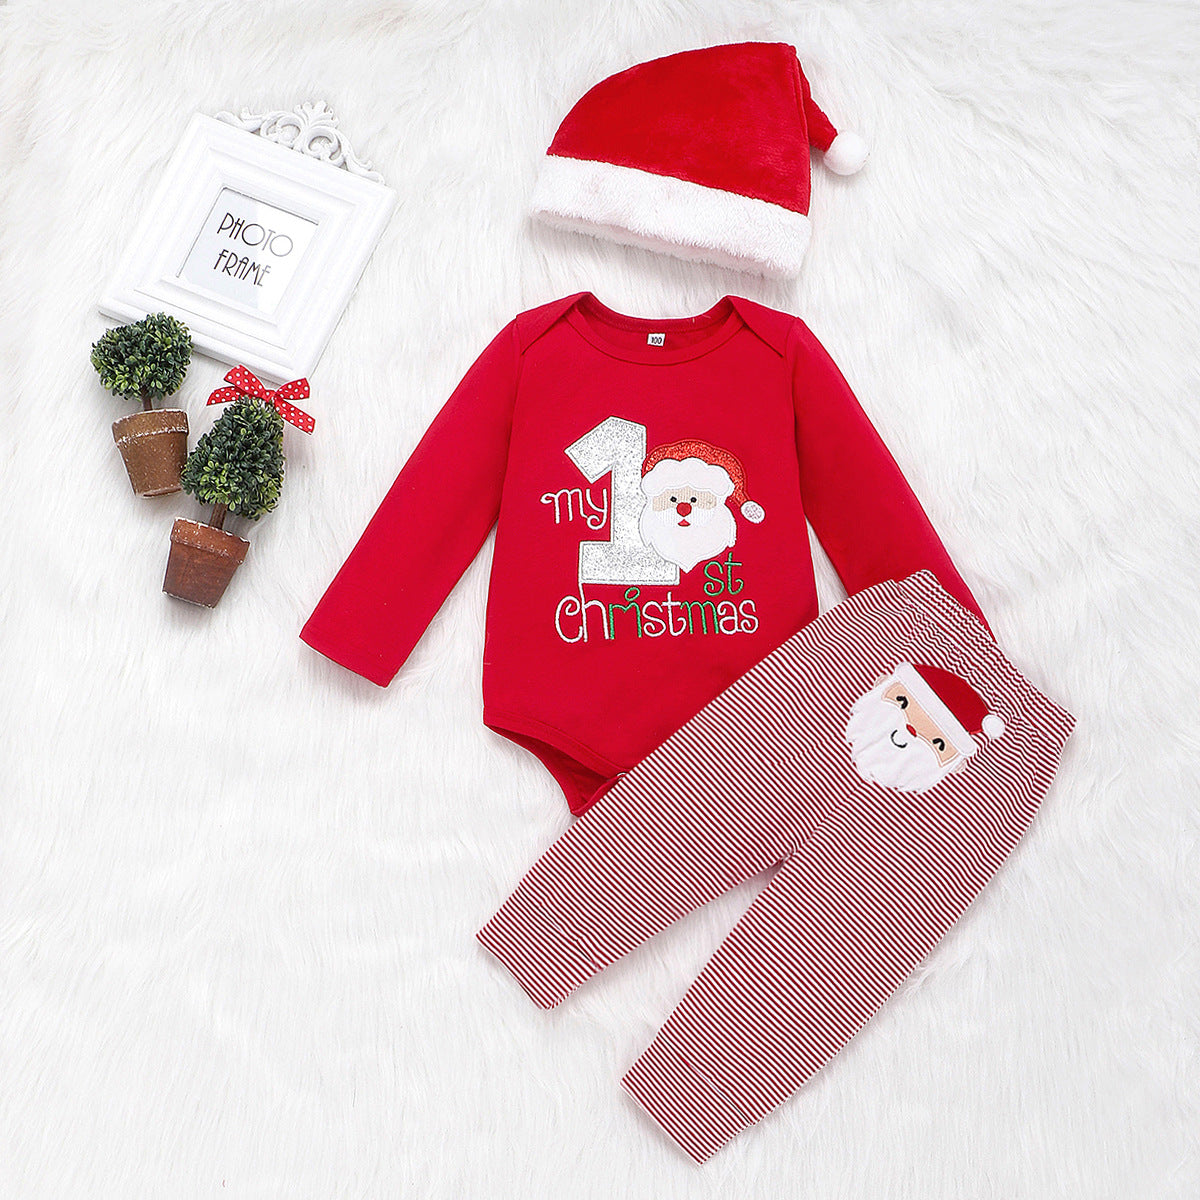 Festive Santa Claus Kids Set: Spread holiday joy with this adorable ensemble—in-store now for celebrations! image 1